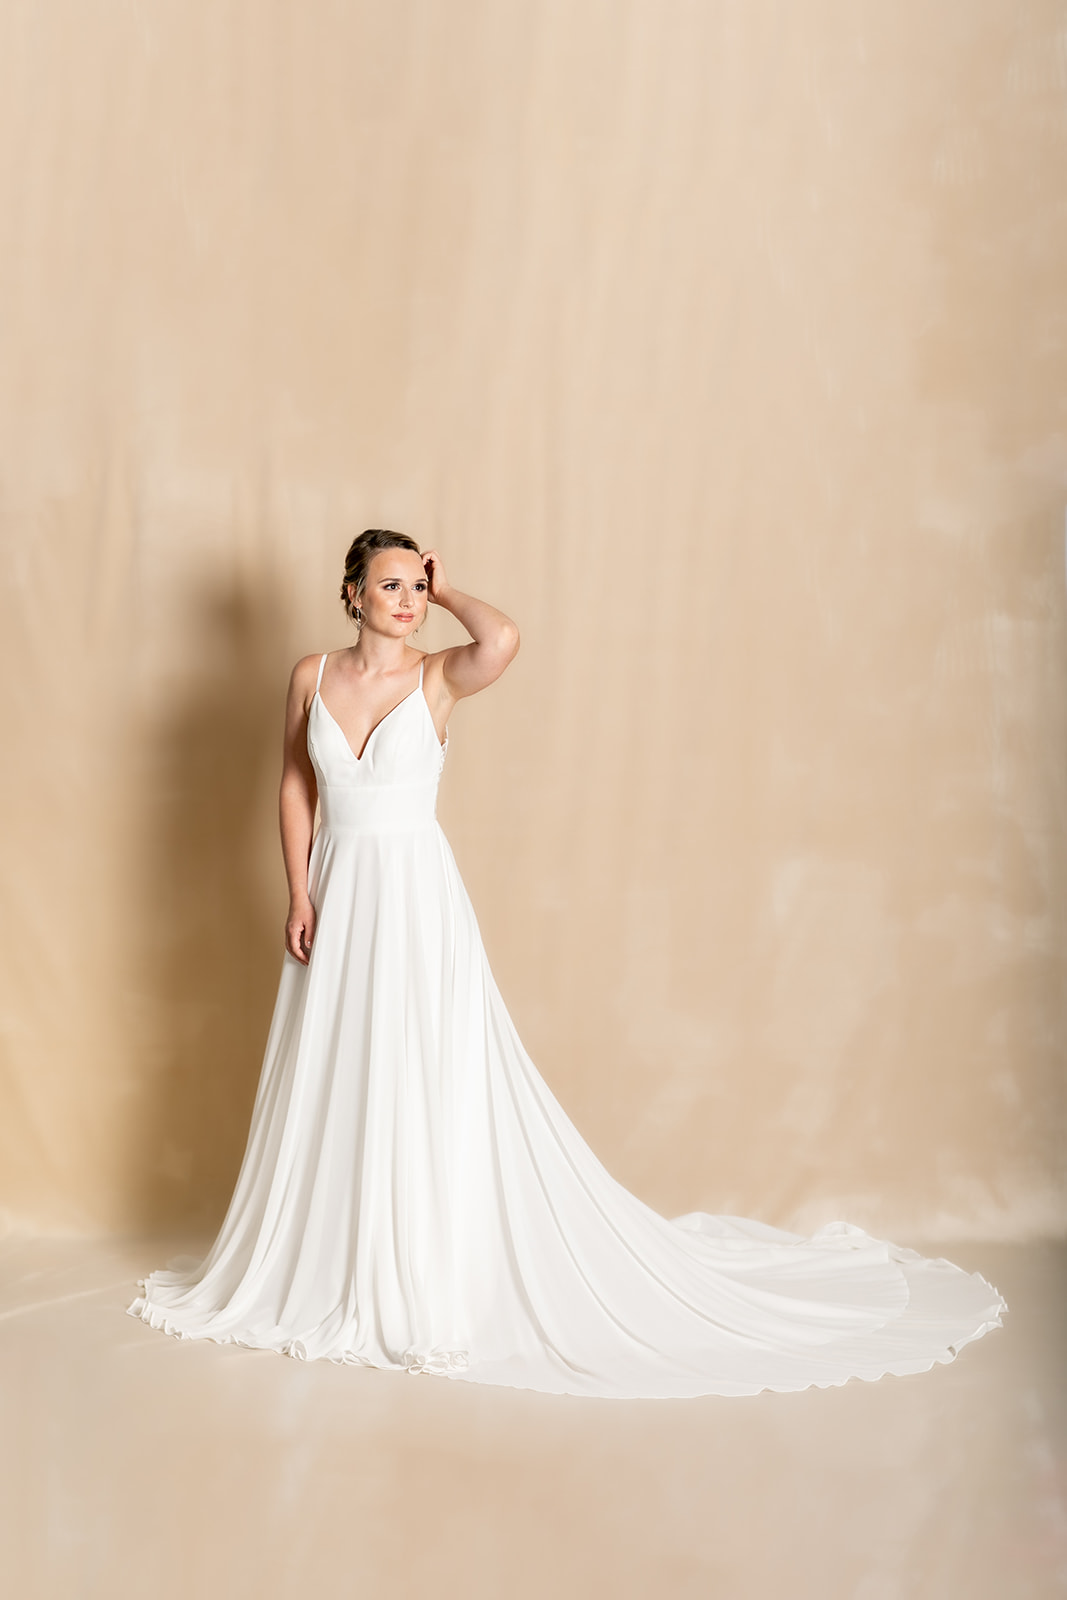 chiffon wedding dress from K&B Bridals Main Street Bridals collection in Maryland